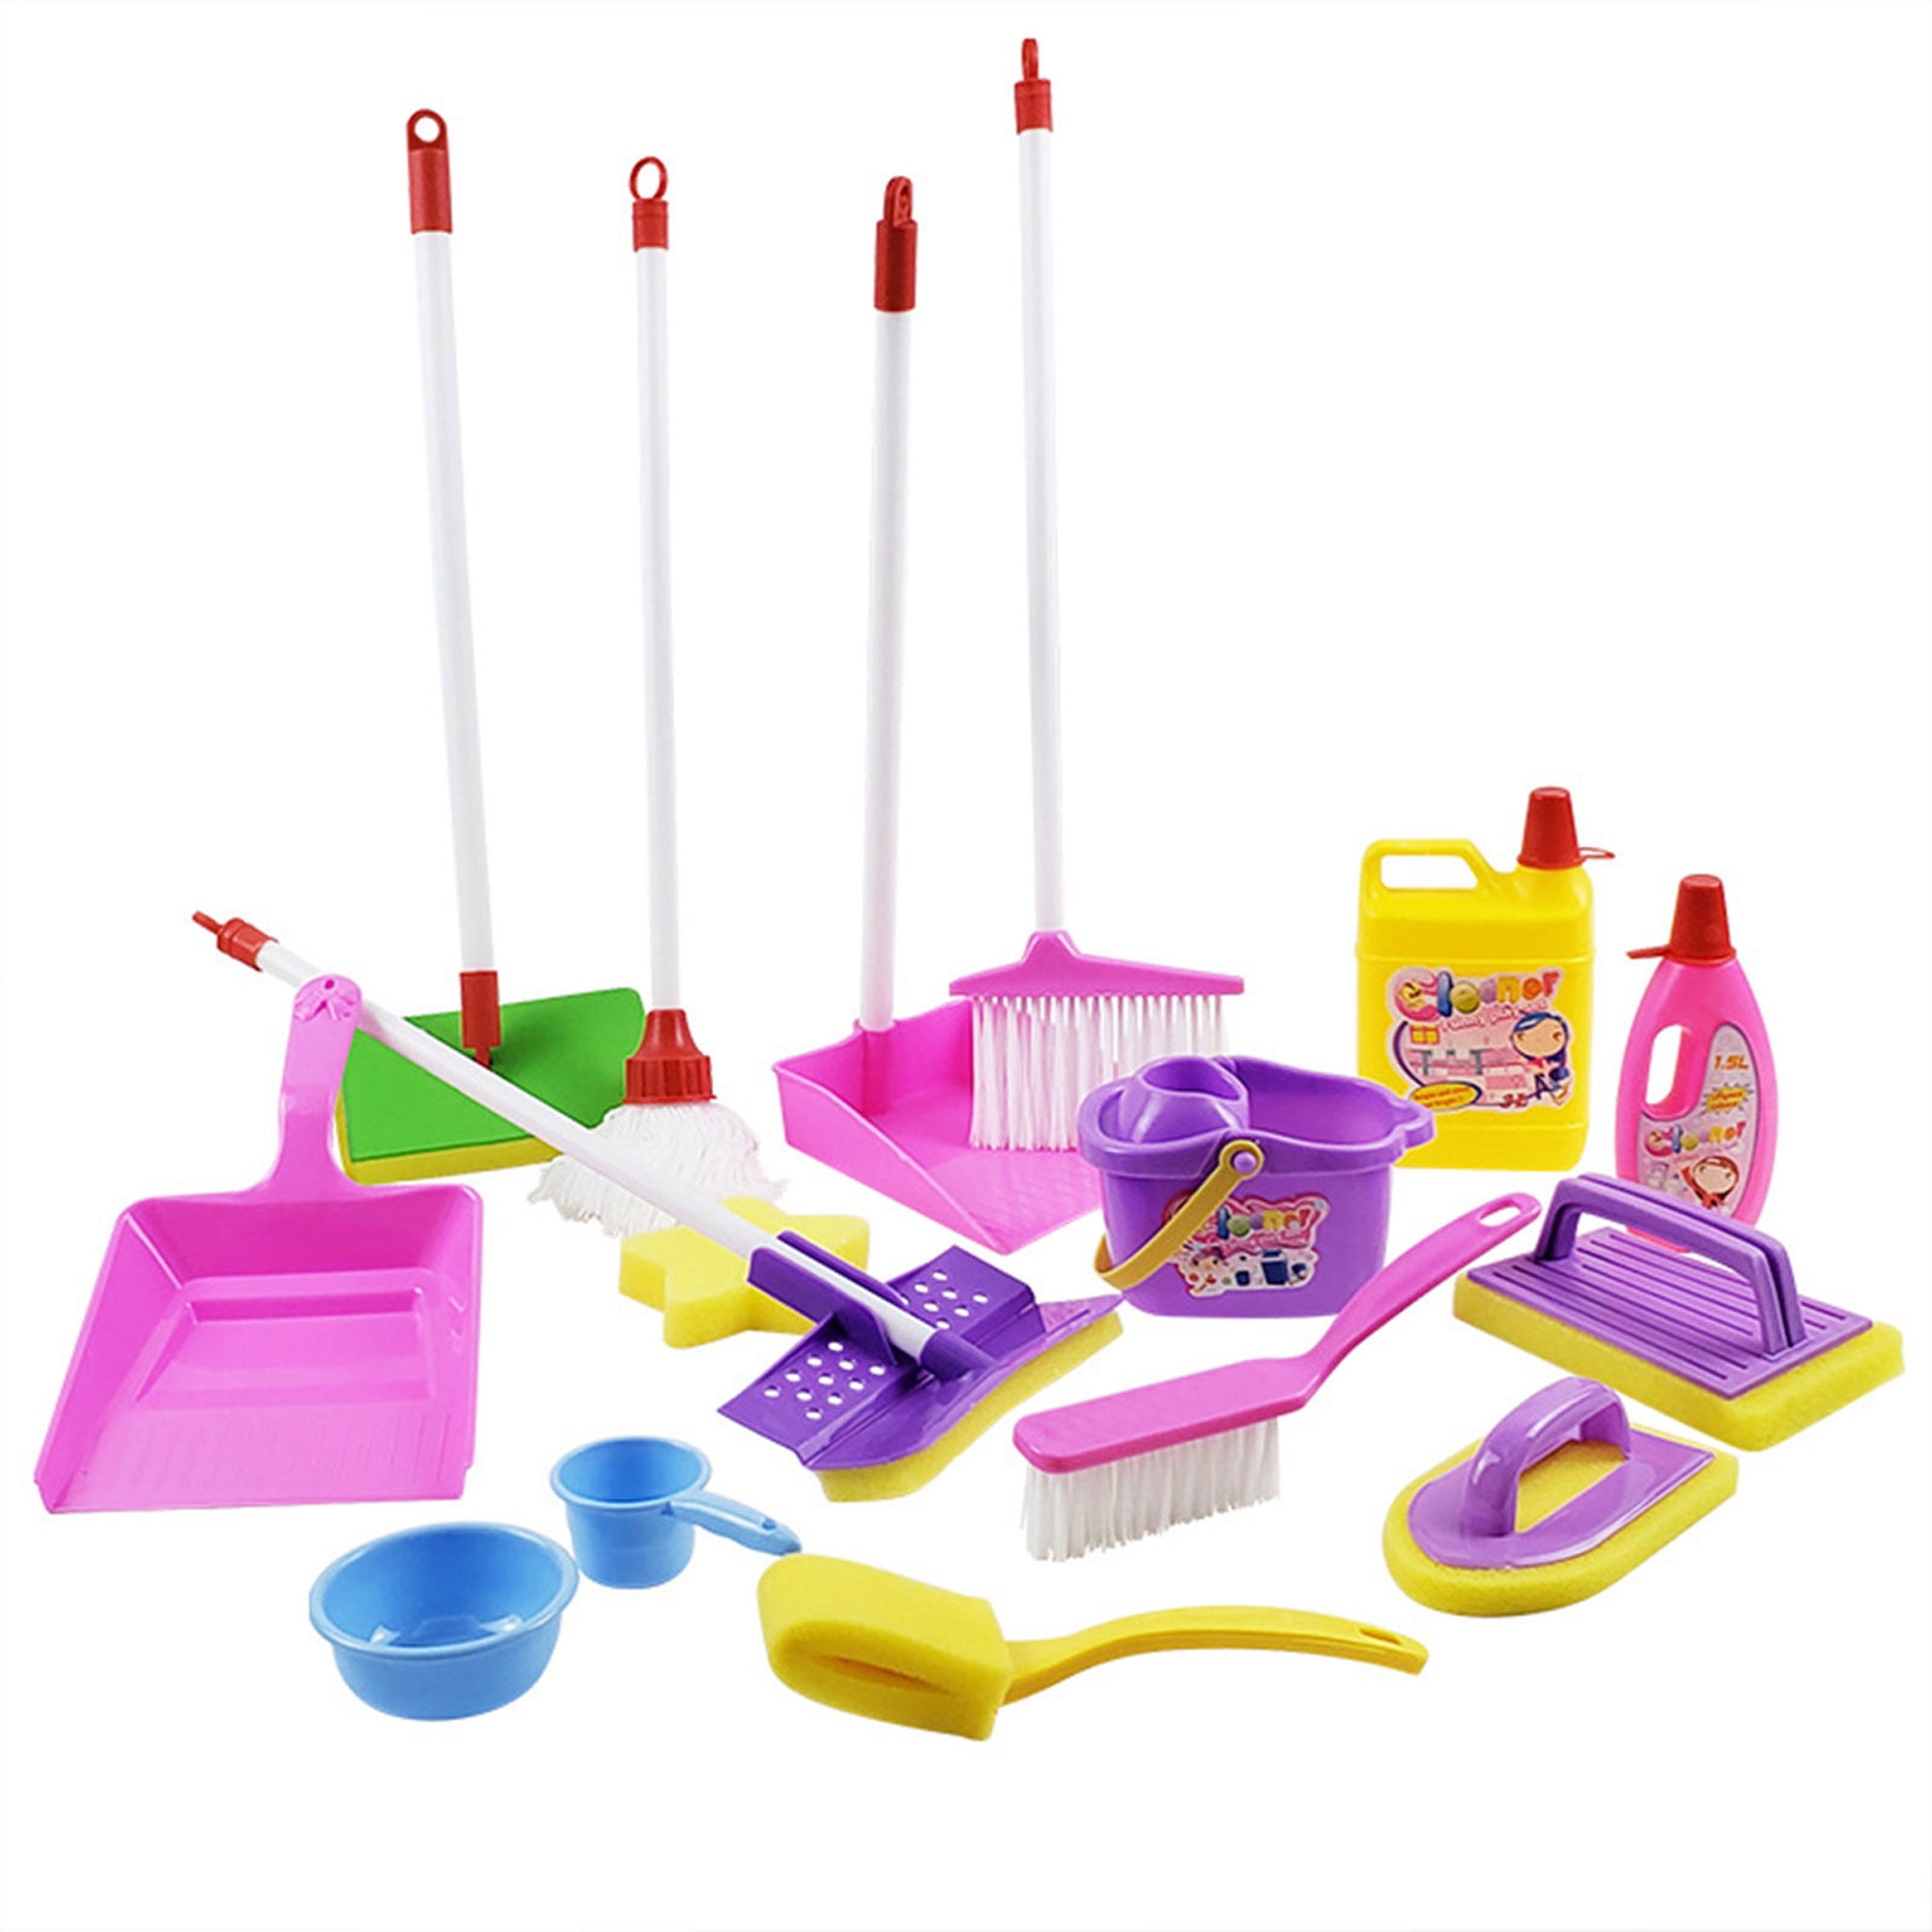 Housekeeping Supplies Play Cleaning Toy Set Includes Broom Birthday Gifts 15 PCs Kids Cleaning Set Brush for Toddlers Learning Toys Child Size Pretend Play House Cleaning Set Mop 